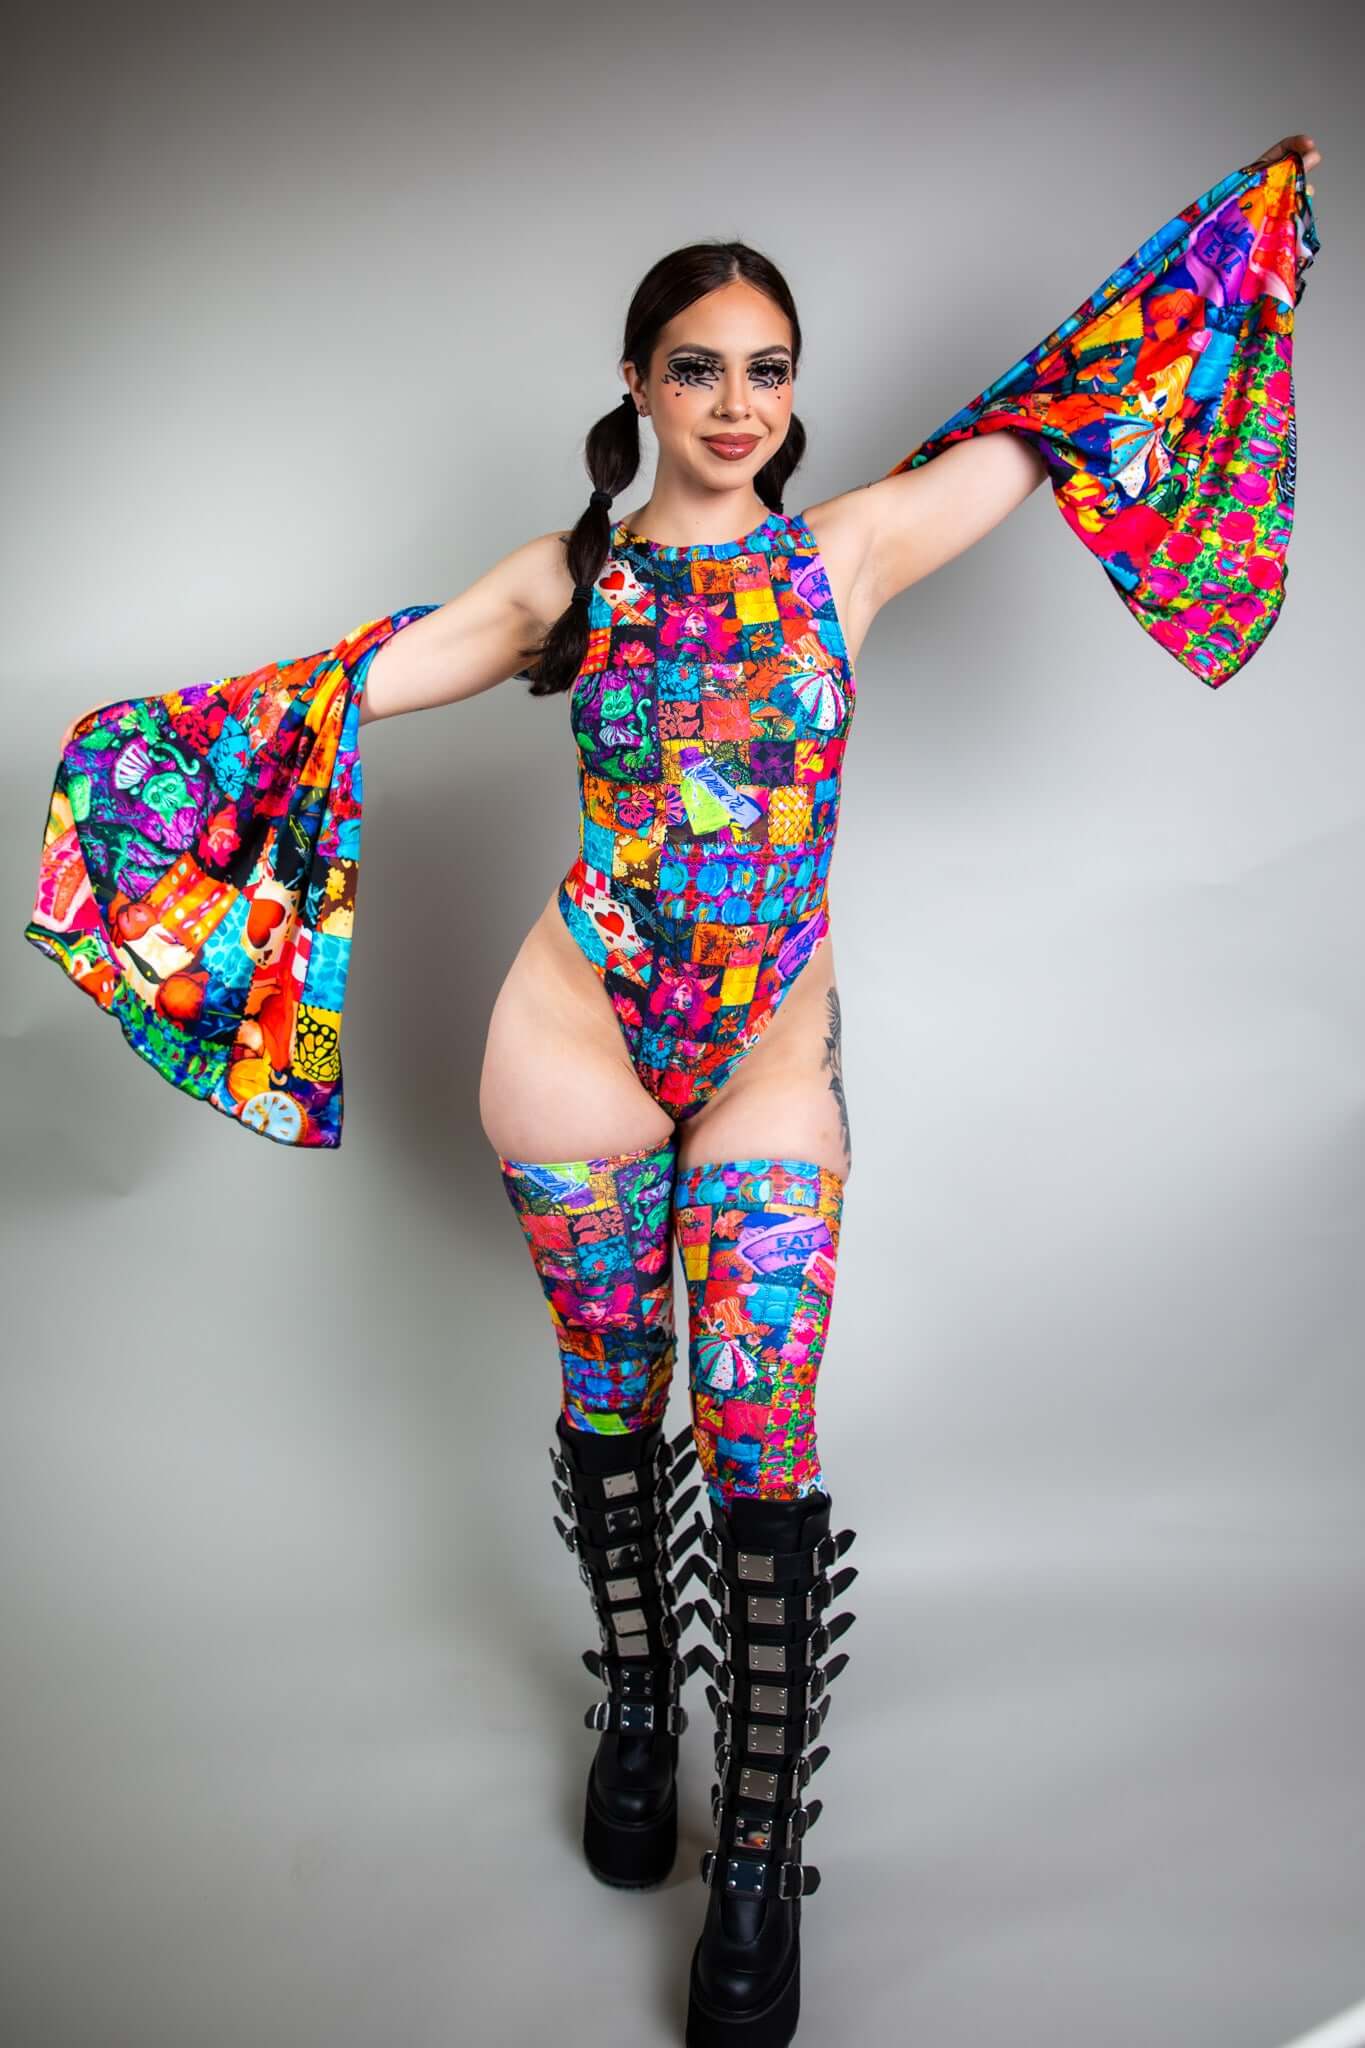 A girl with swirly black eye makeup wearing a rainbow patchwork bodysuit with a matching pashmina draped over her arms.